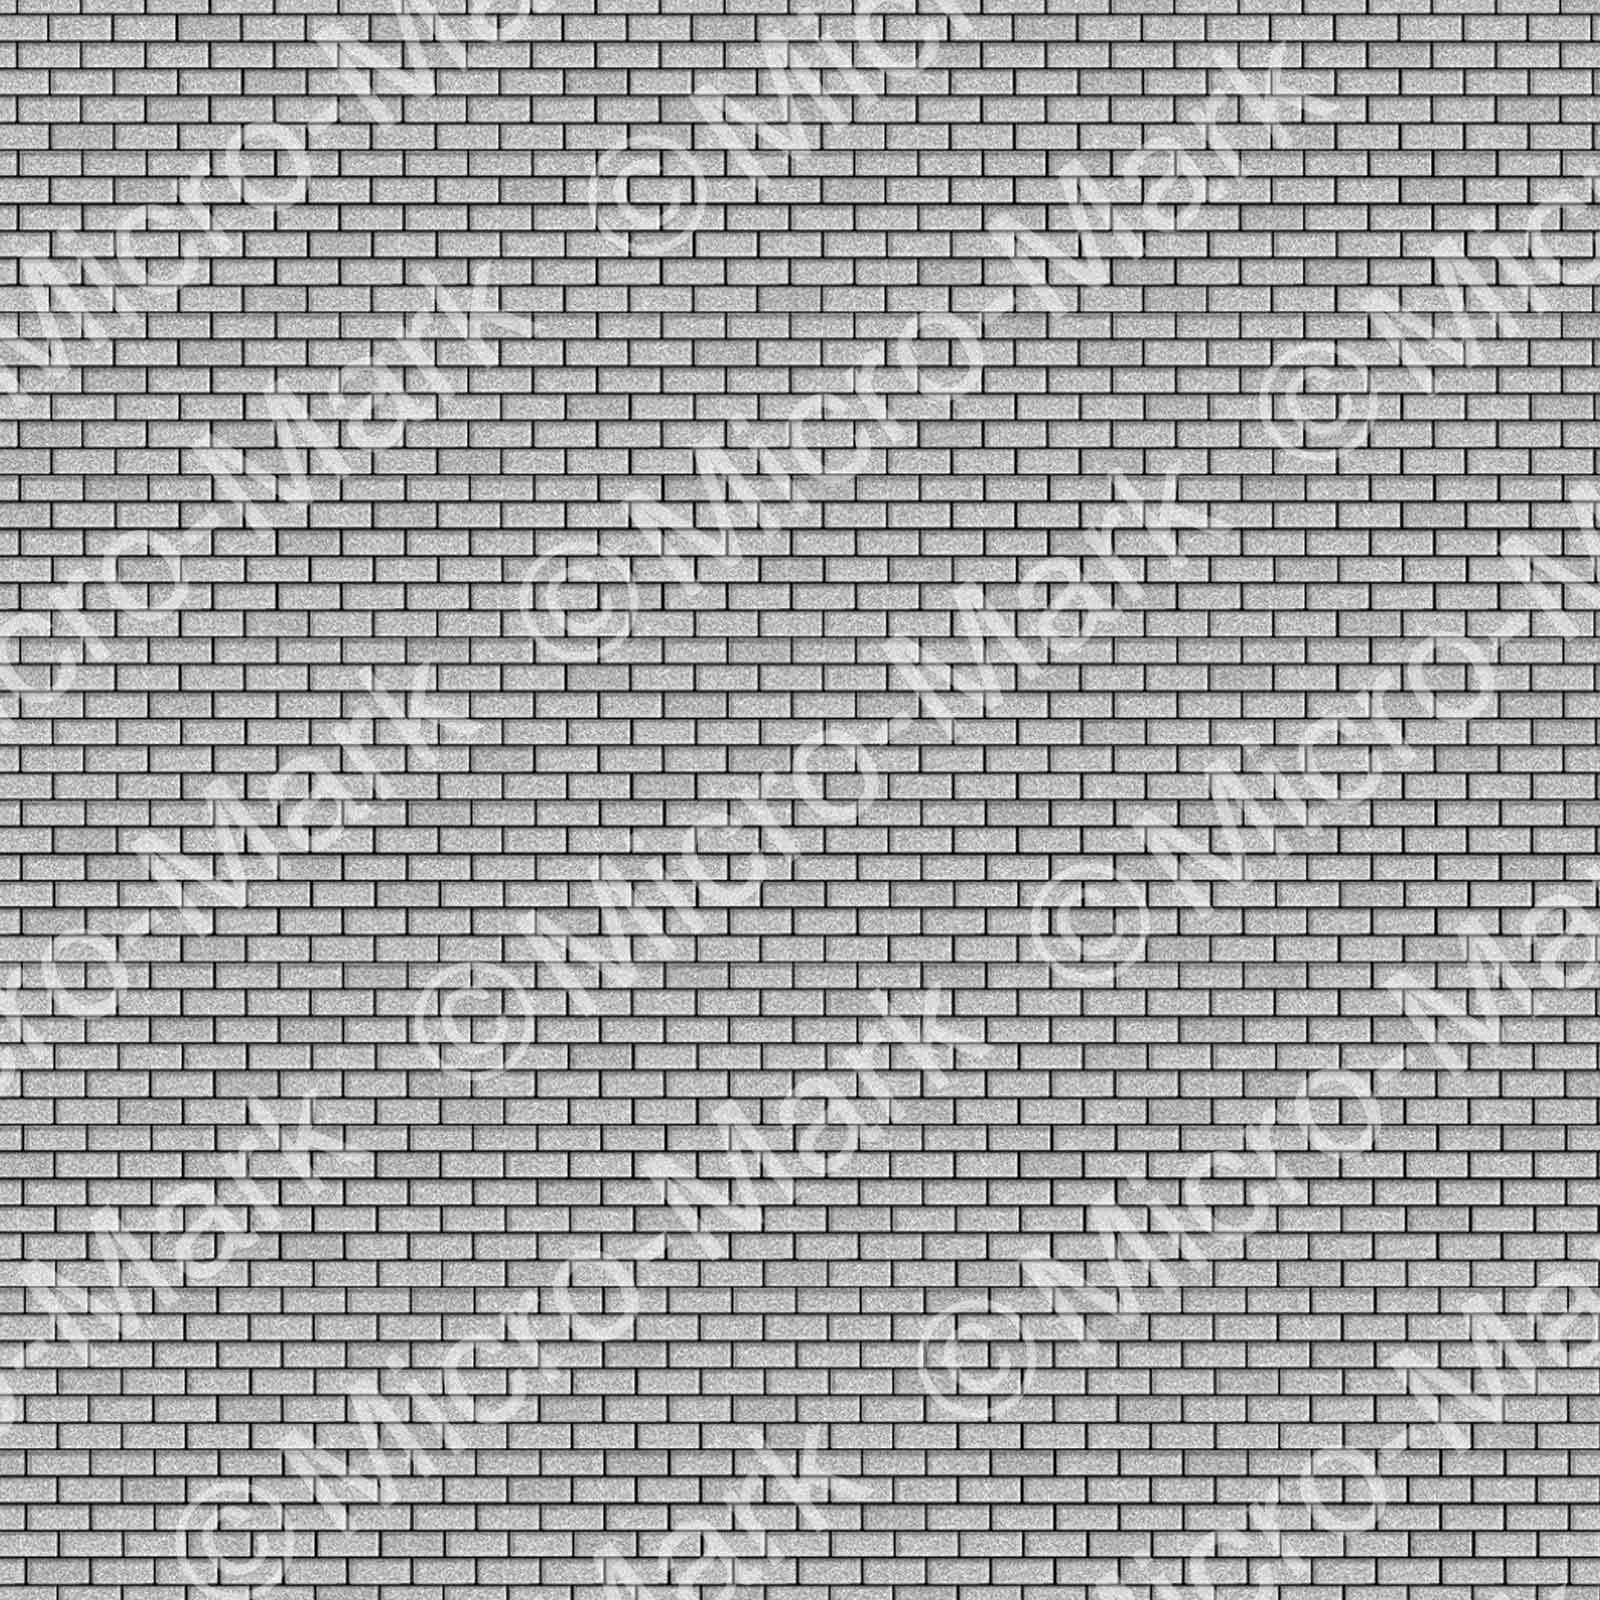 Micro-Mark Gray Roof Shingles Building Papers, O Scale -  4pk